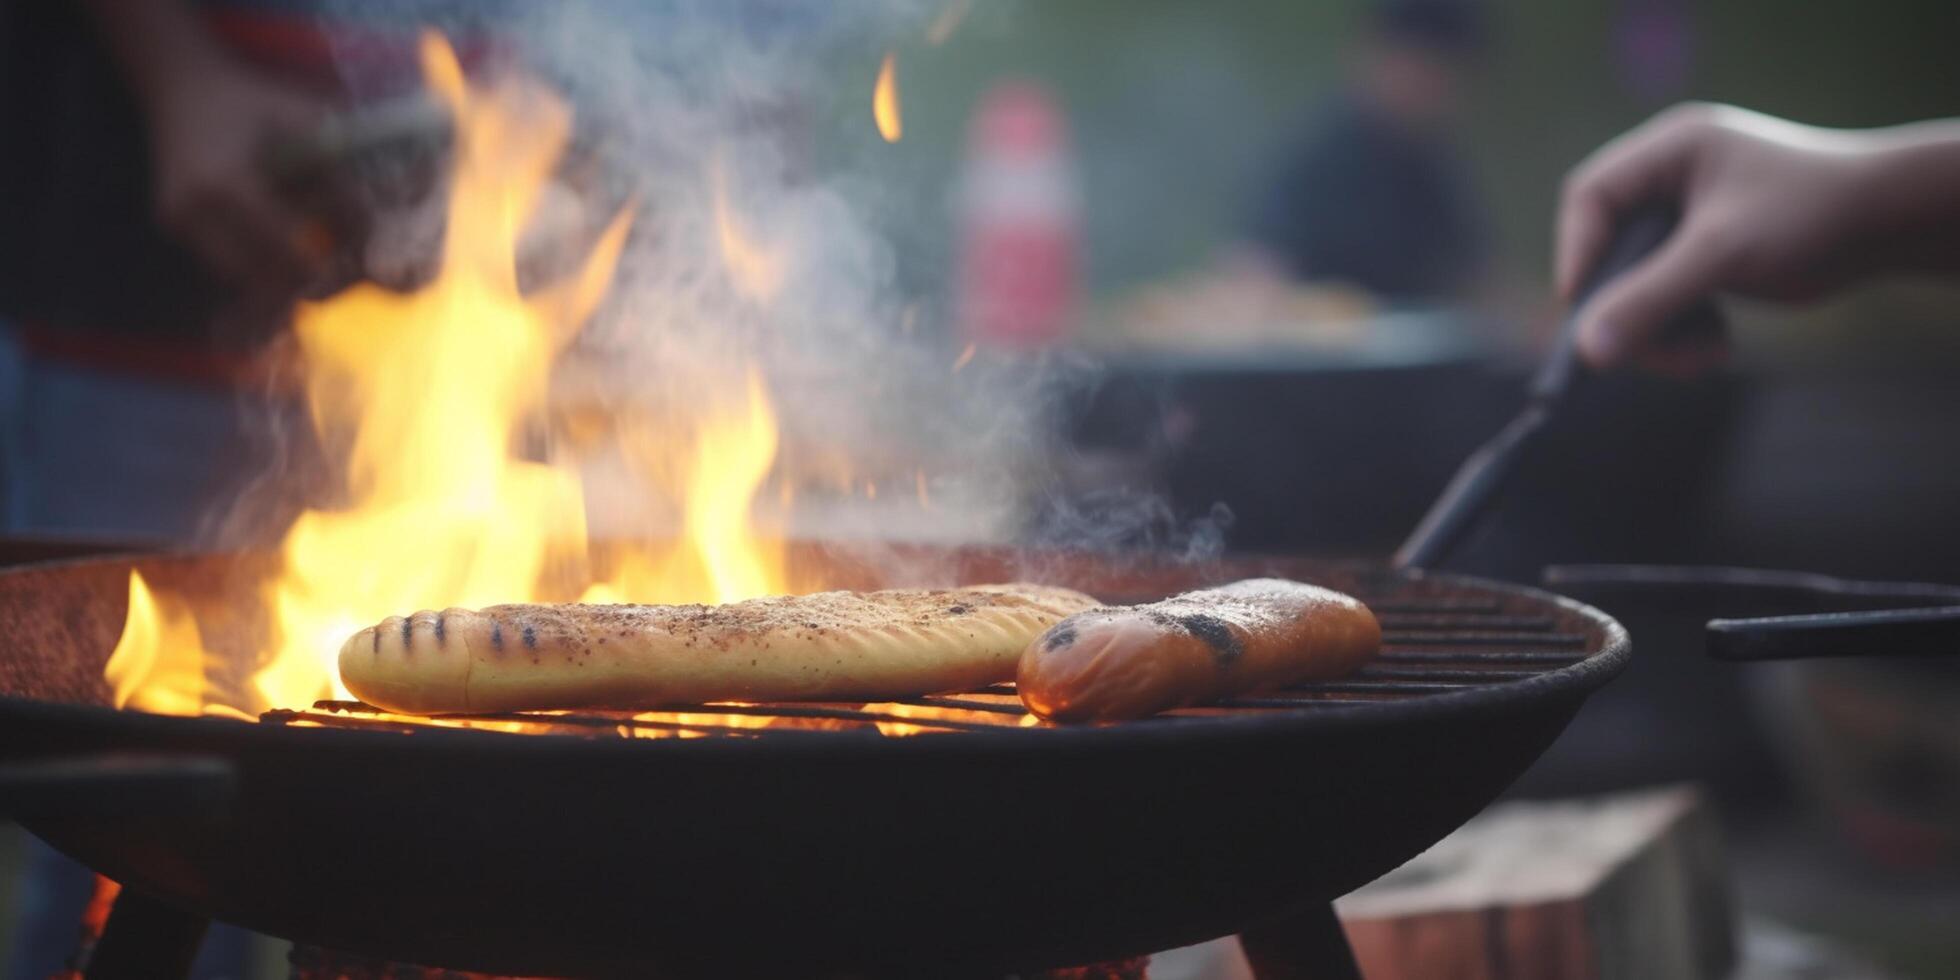 Sizzling Hot Close-up of Open Flame BBQ at Camping Site photo